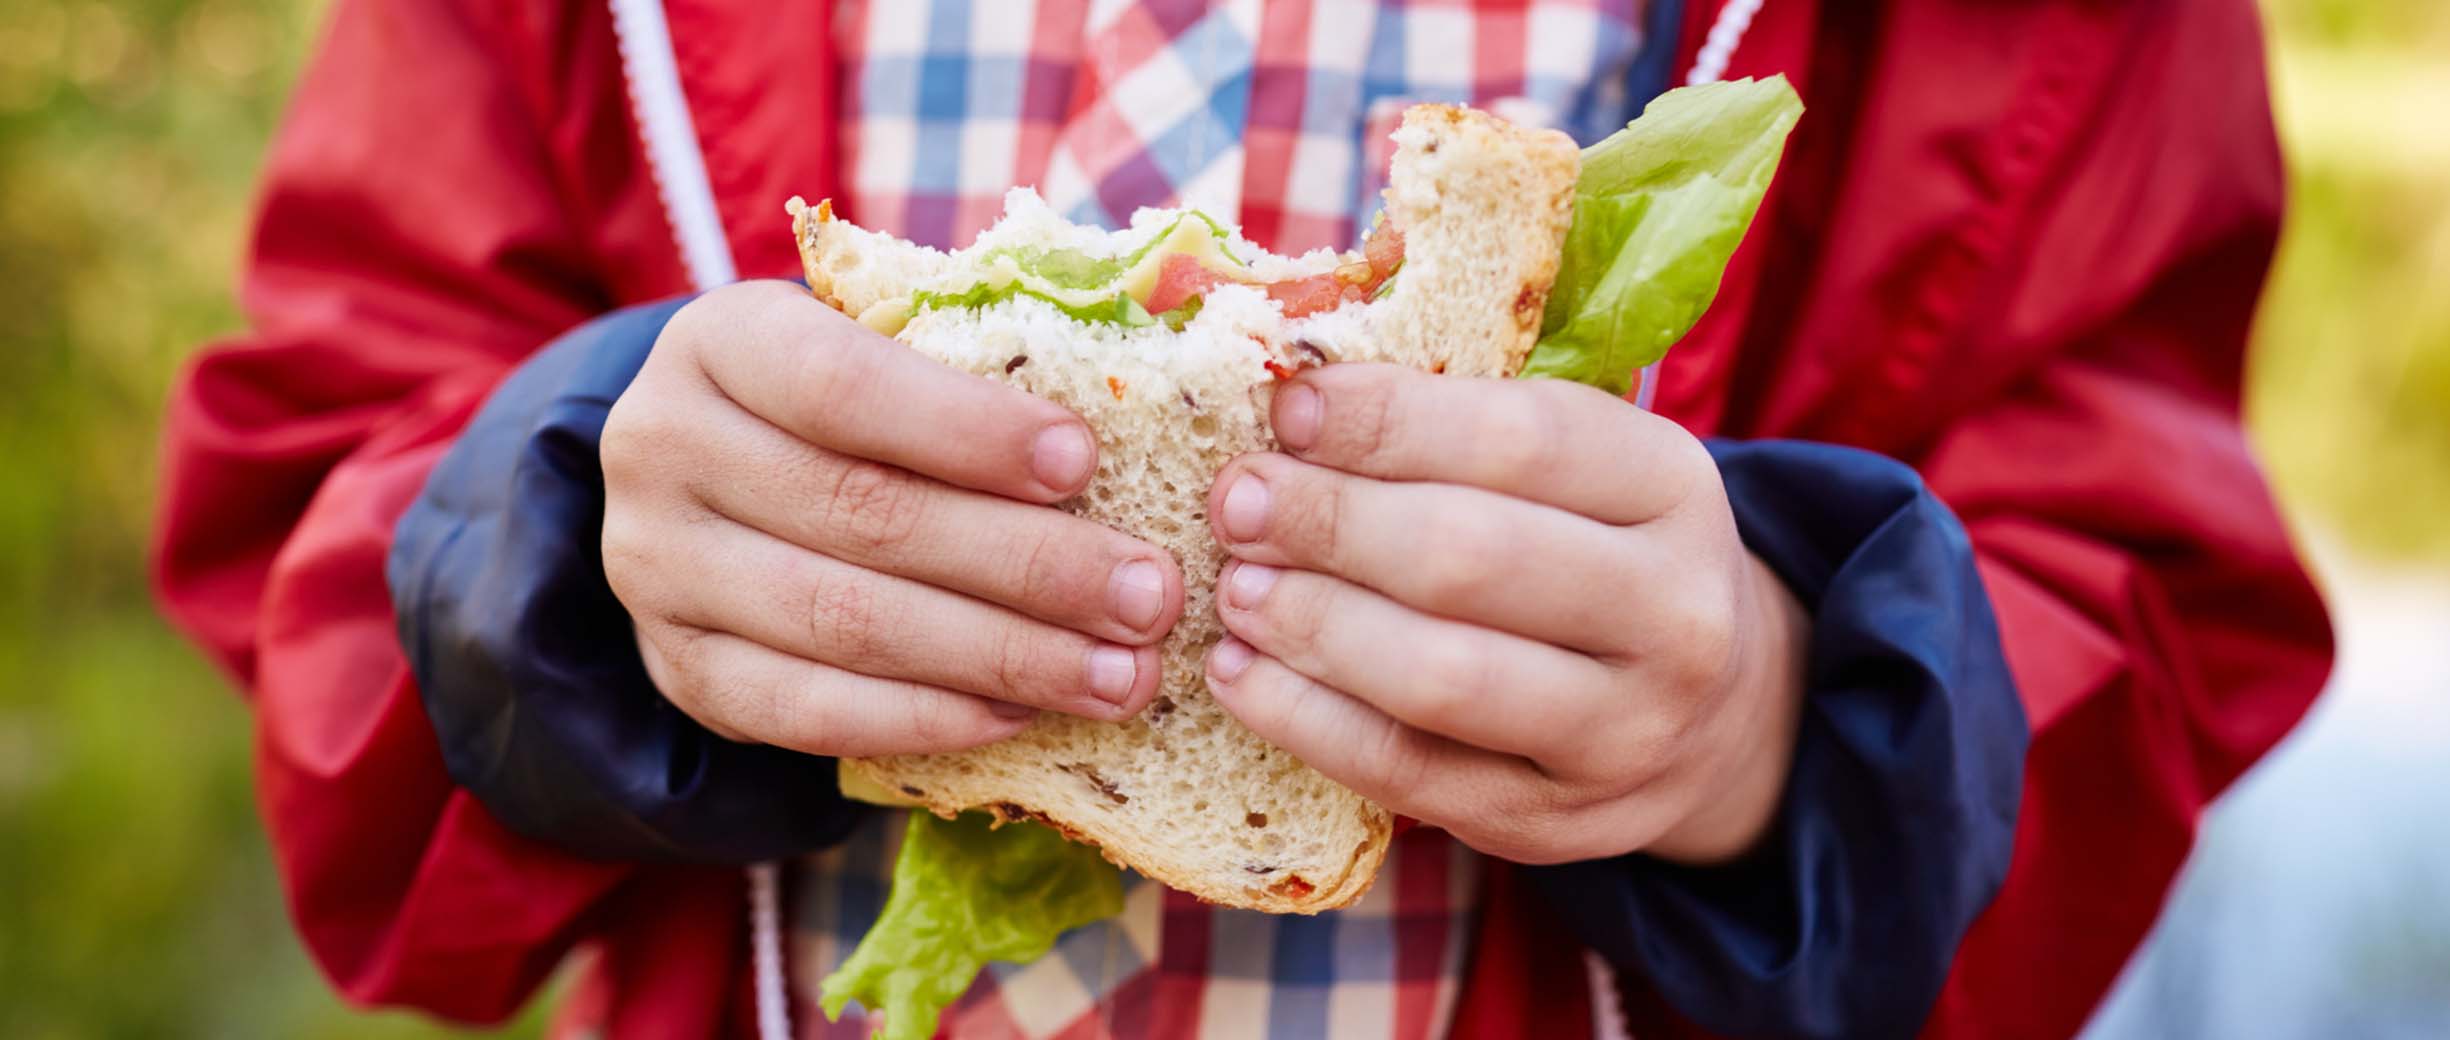 11 Simple Ideas to Spice Up Your Kids’ Lunch